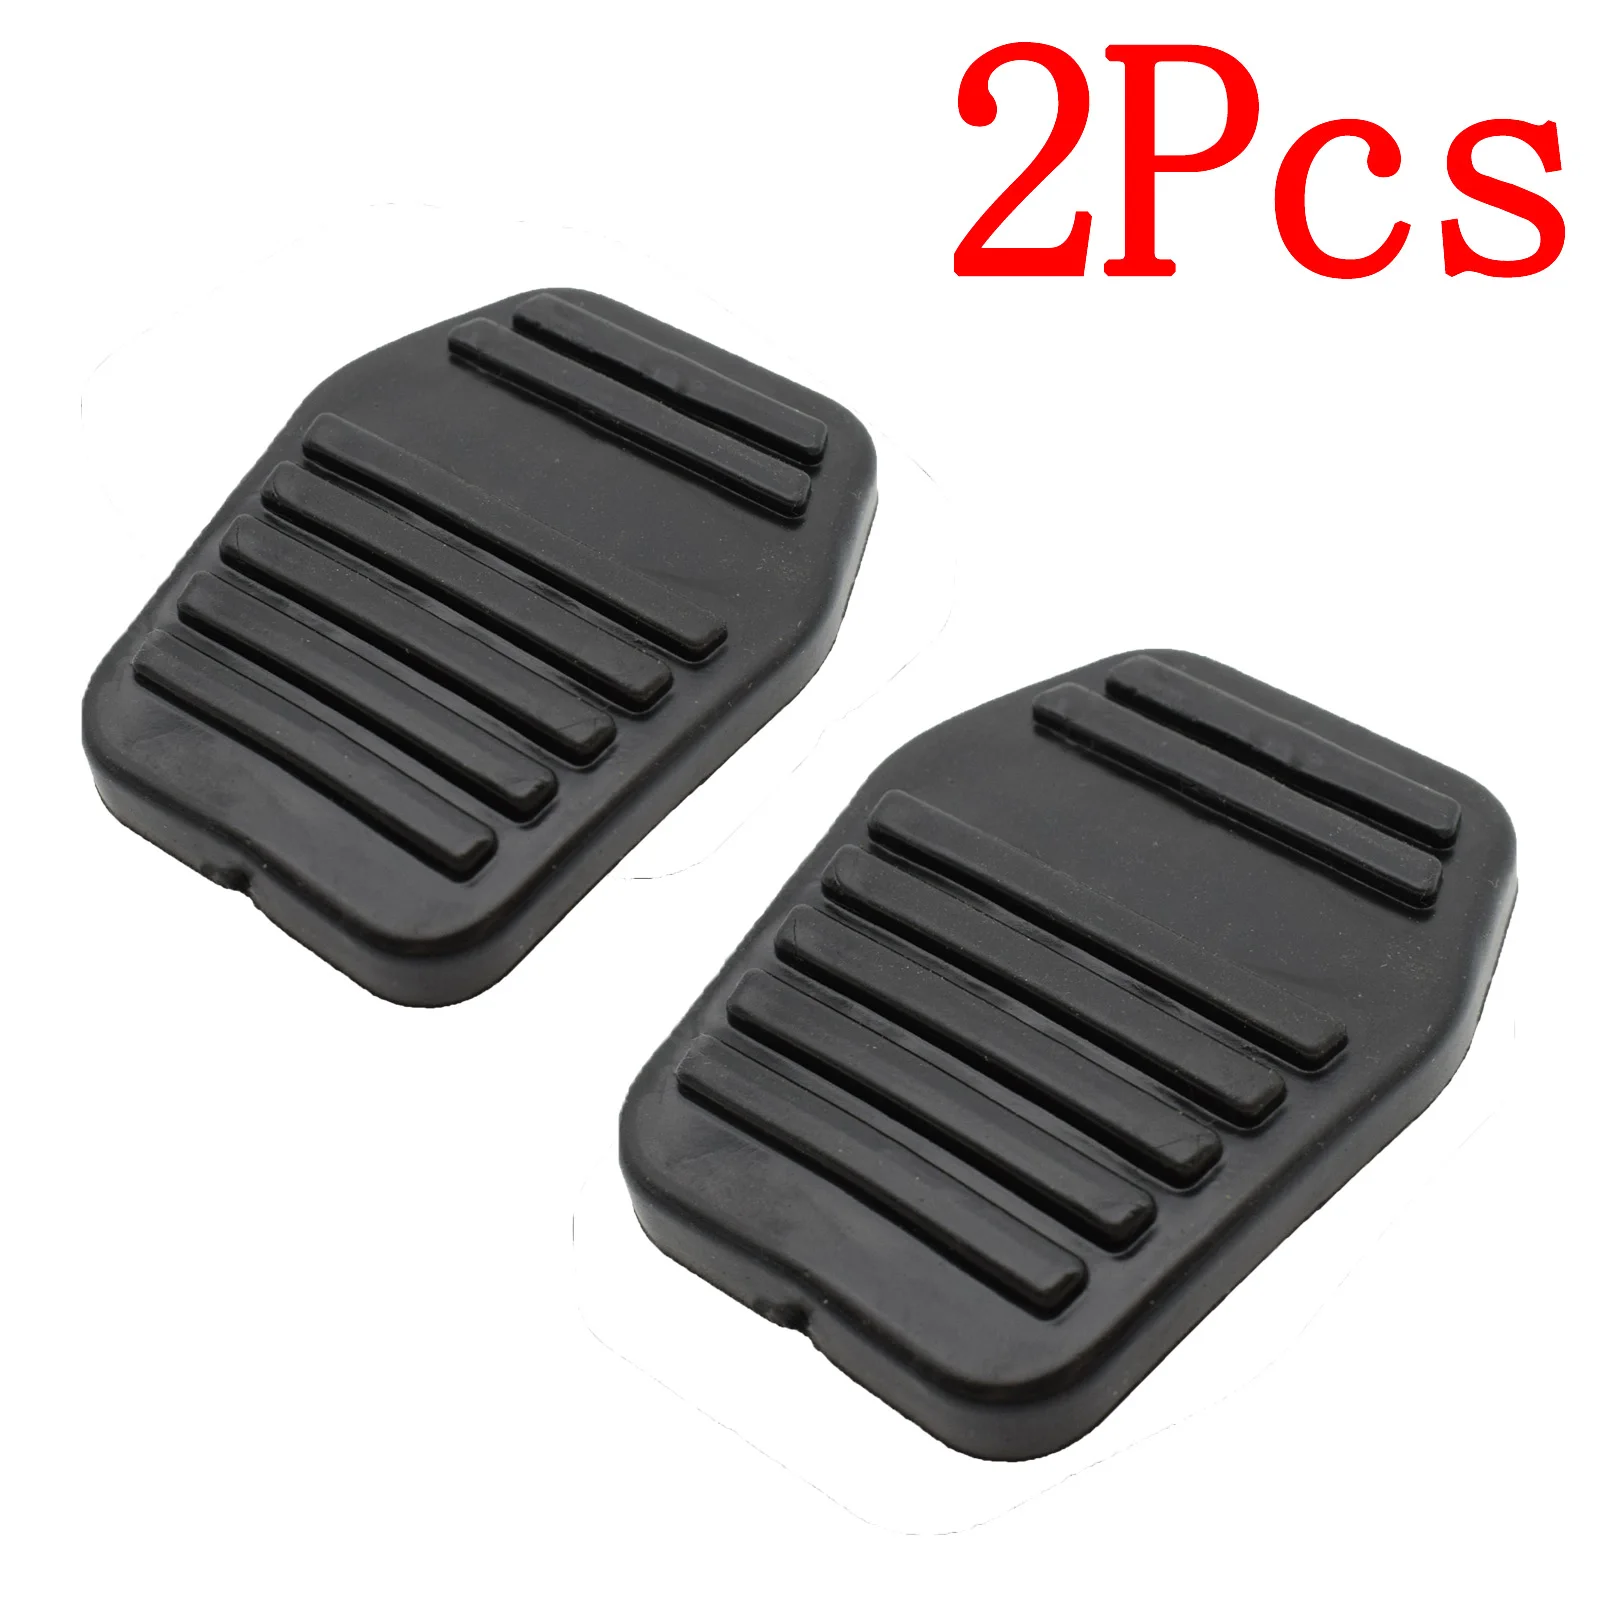 2Pcs Auto Car Brake Clutch Skid-proof Pedal Cover Pad Covers For Ford Transit - £10.85 GBP